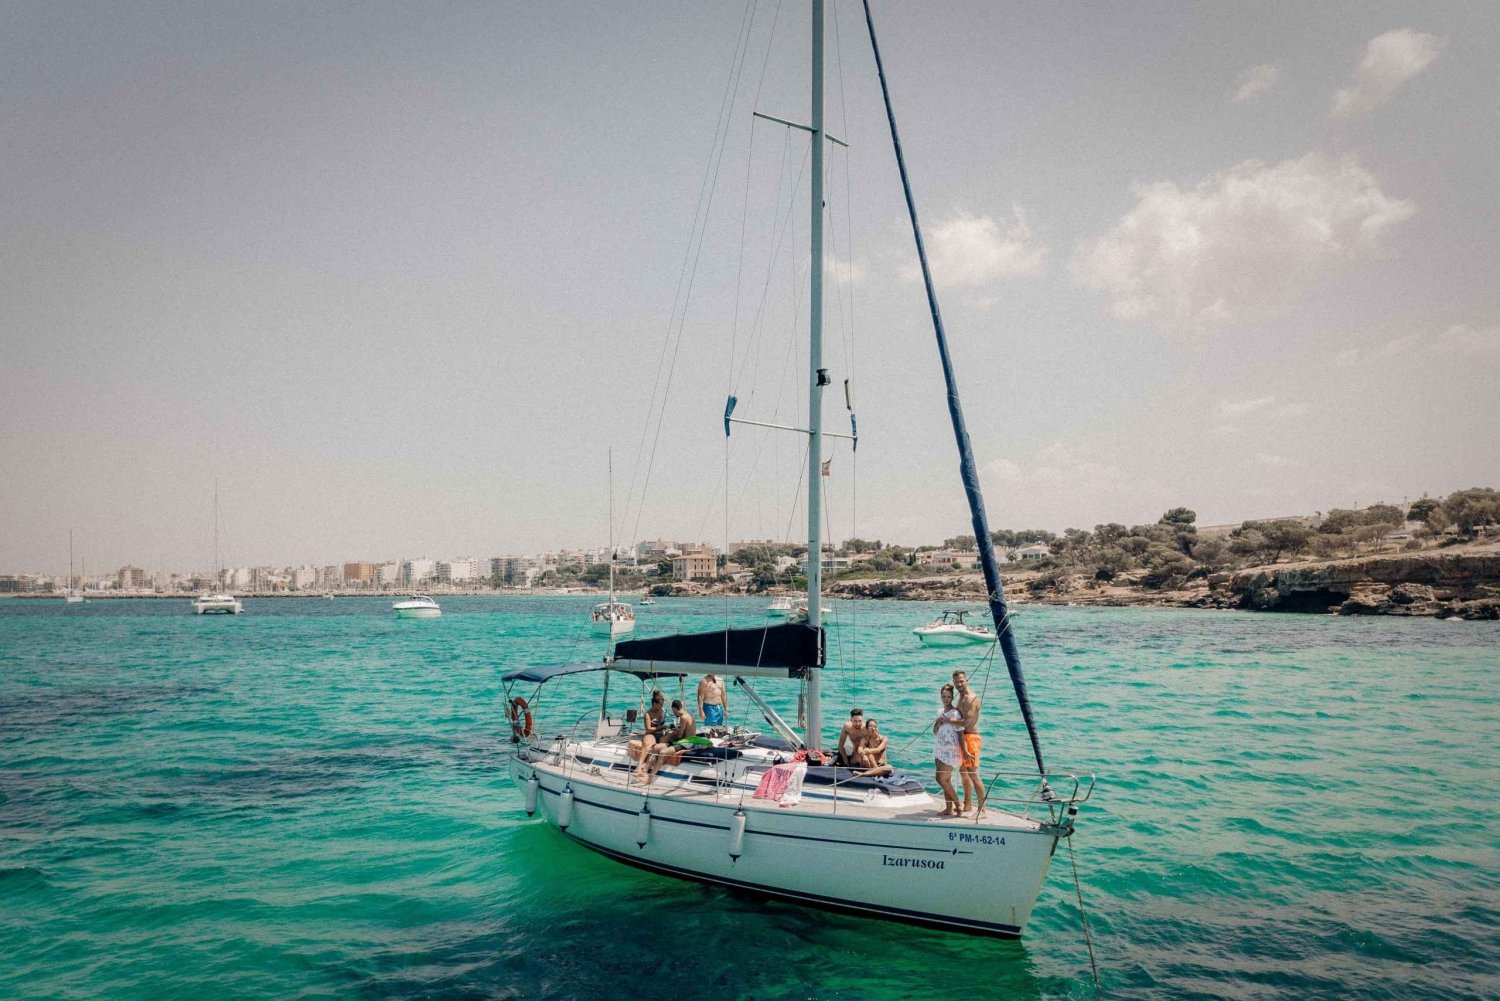 From can Pastilla : Sailing boat trip with Food & Drinks